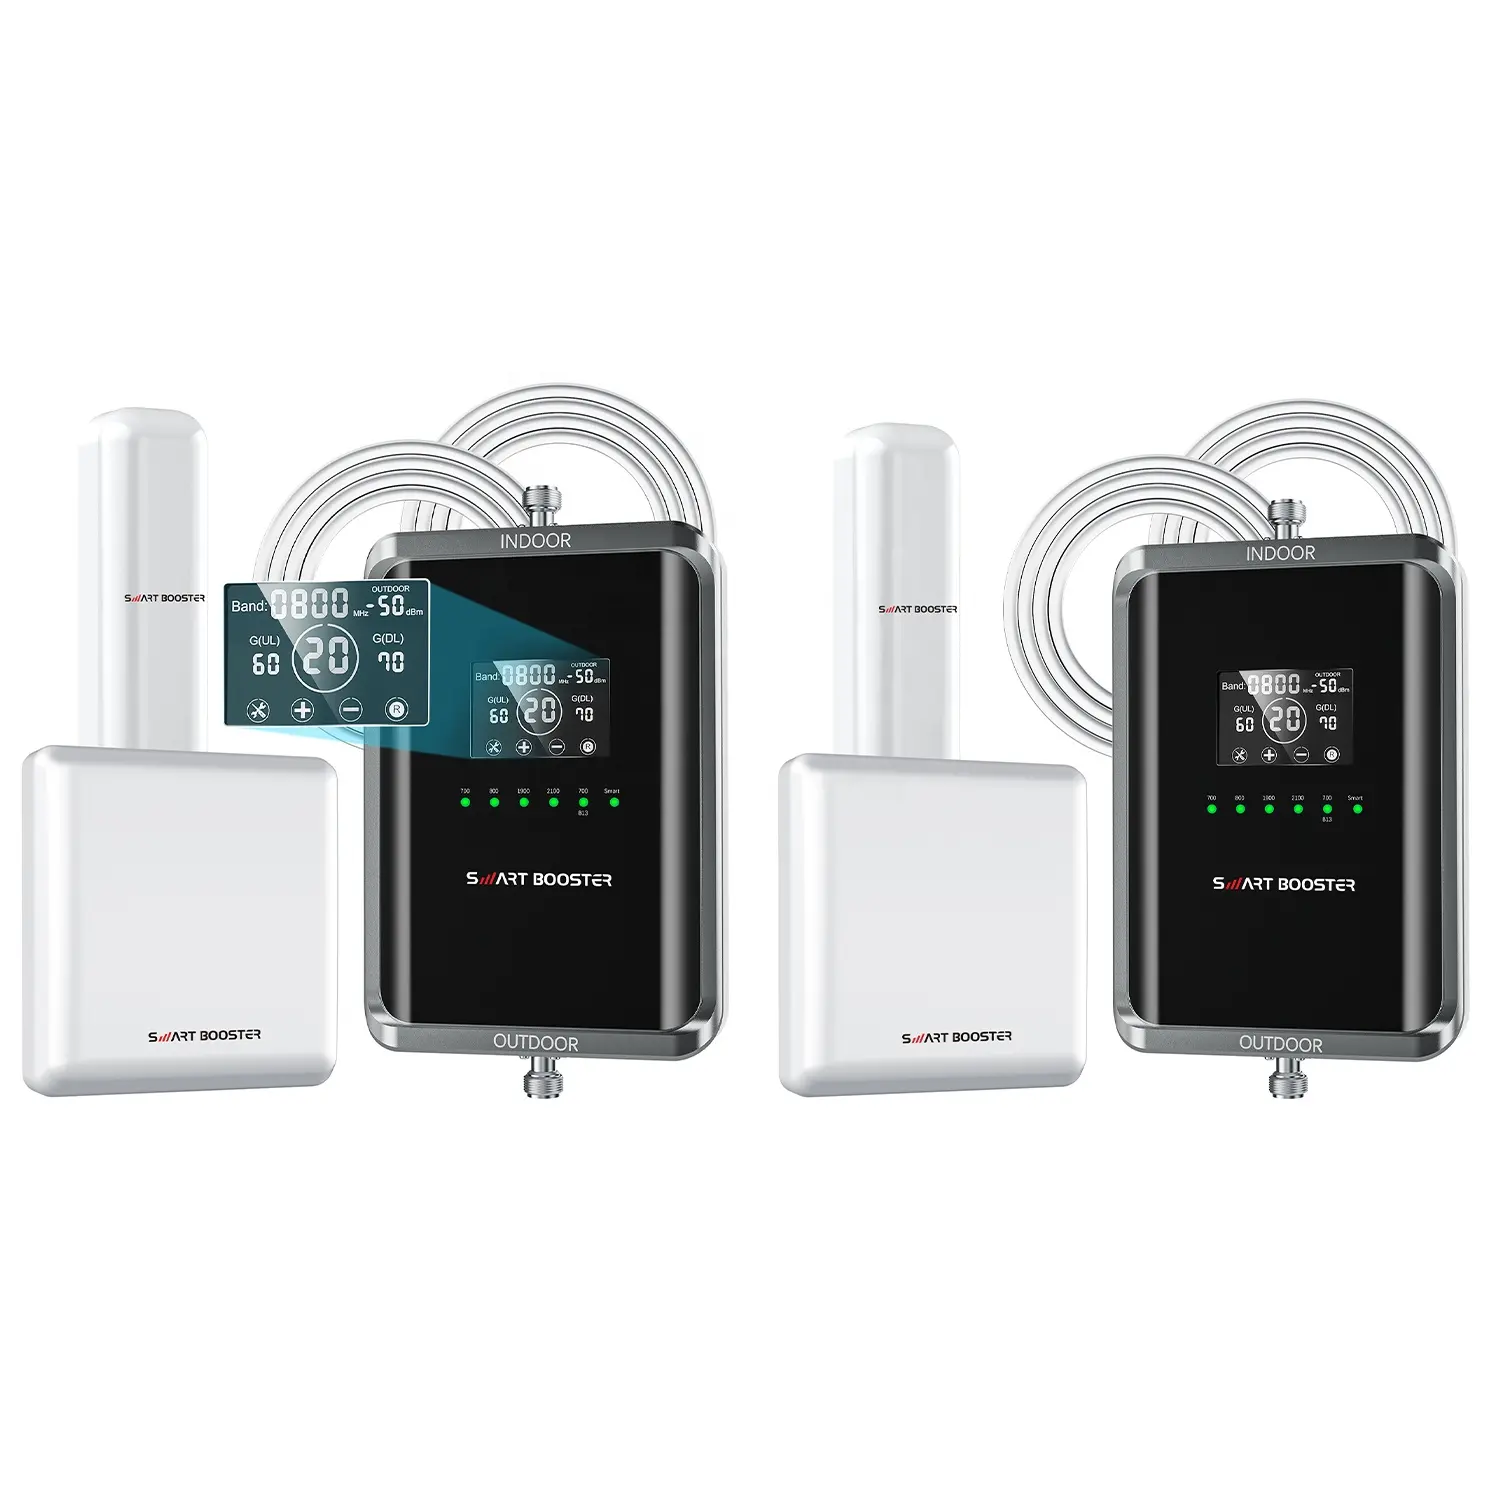 Cellphone Signal Repeater 2G 3G 4G Mobile Phone Signal Amplifier Penta Band Signal Booster Mobile Phone Signal Solution